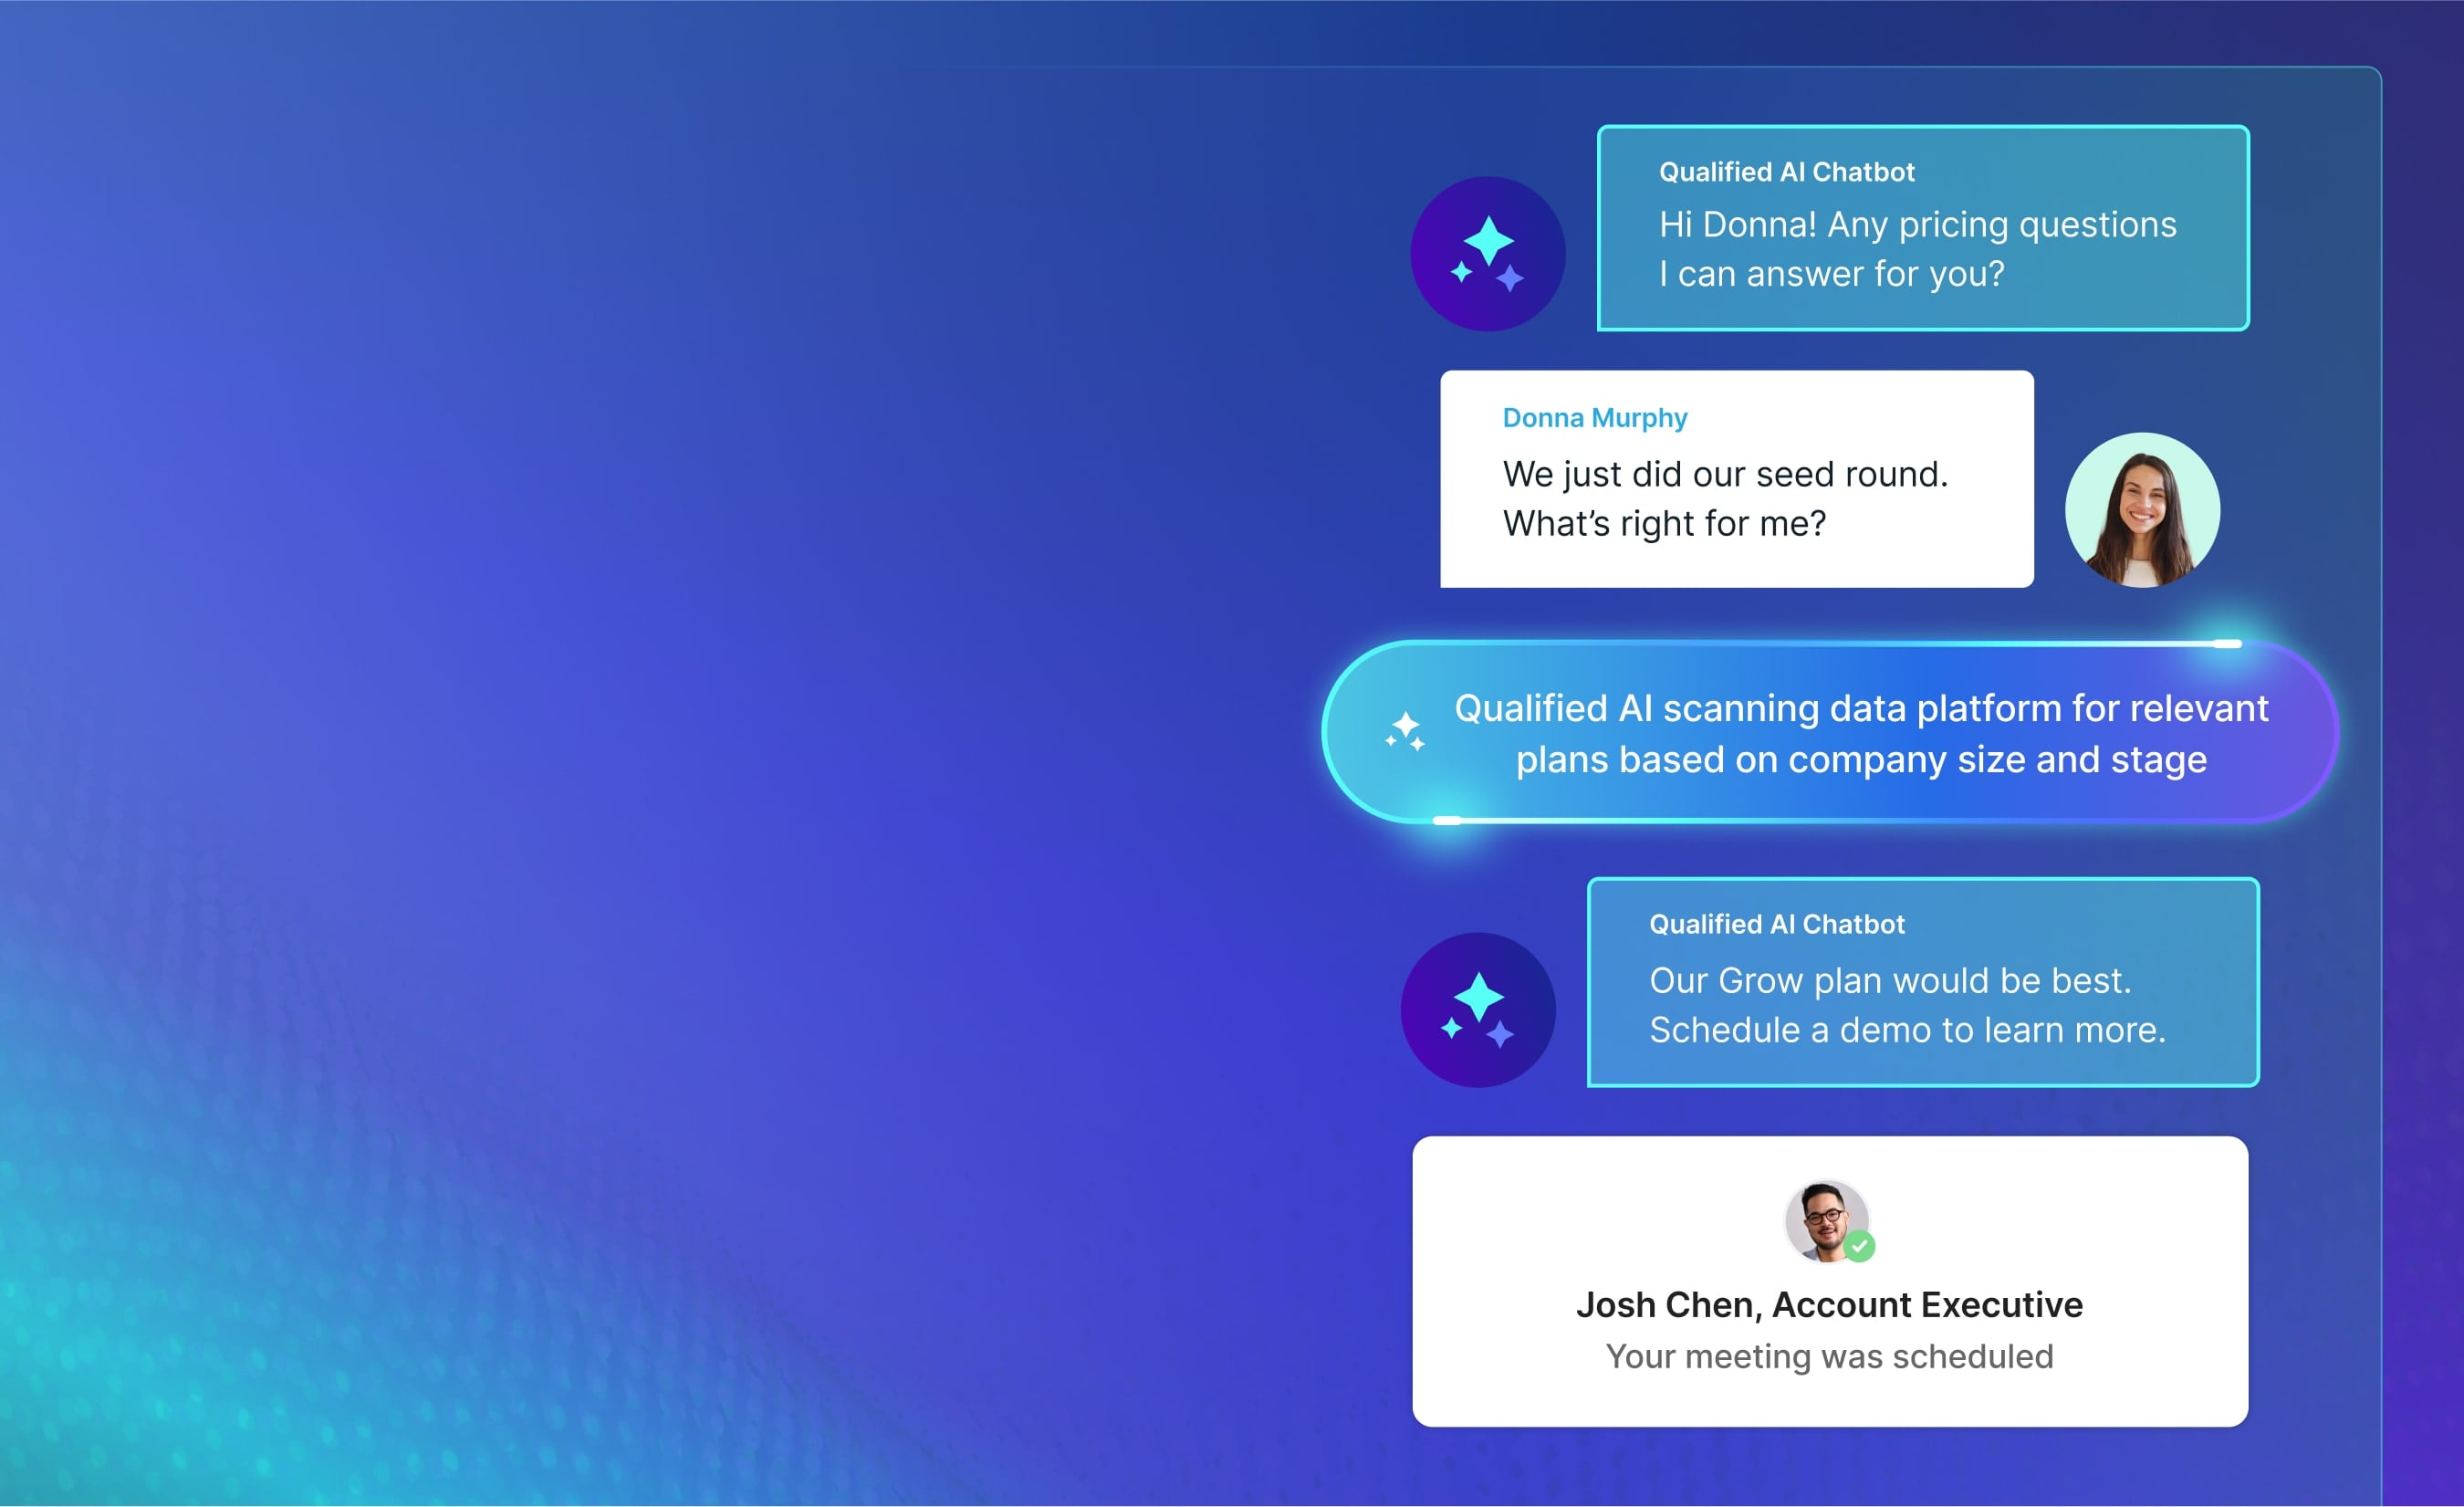 AI Demo Day: Qualified showcases new AI Live Chat and AI Chatbot technology